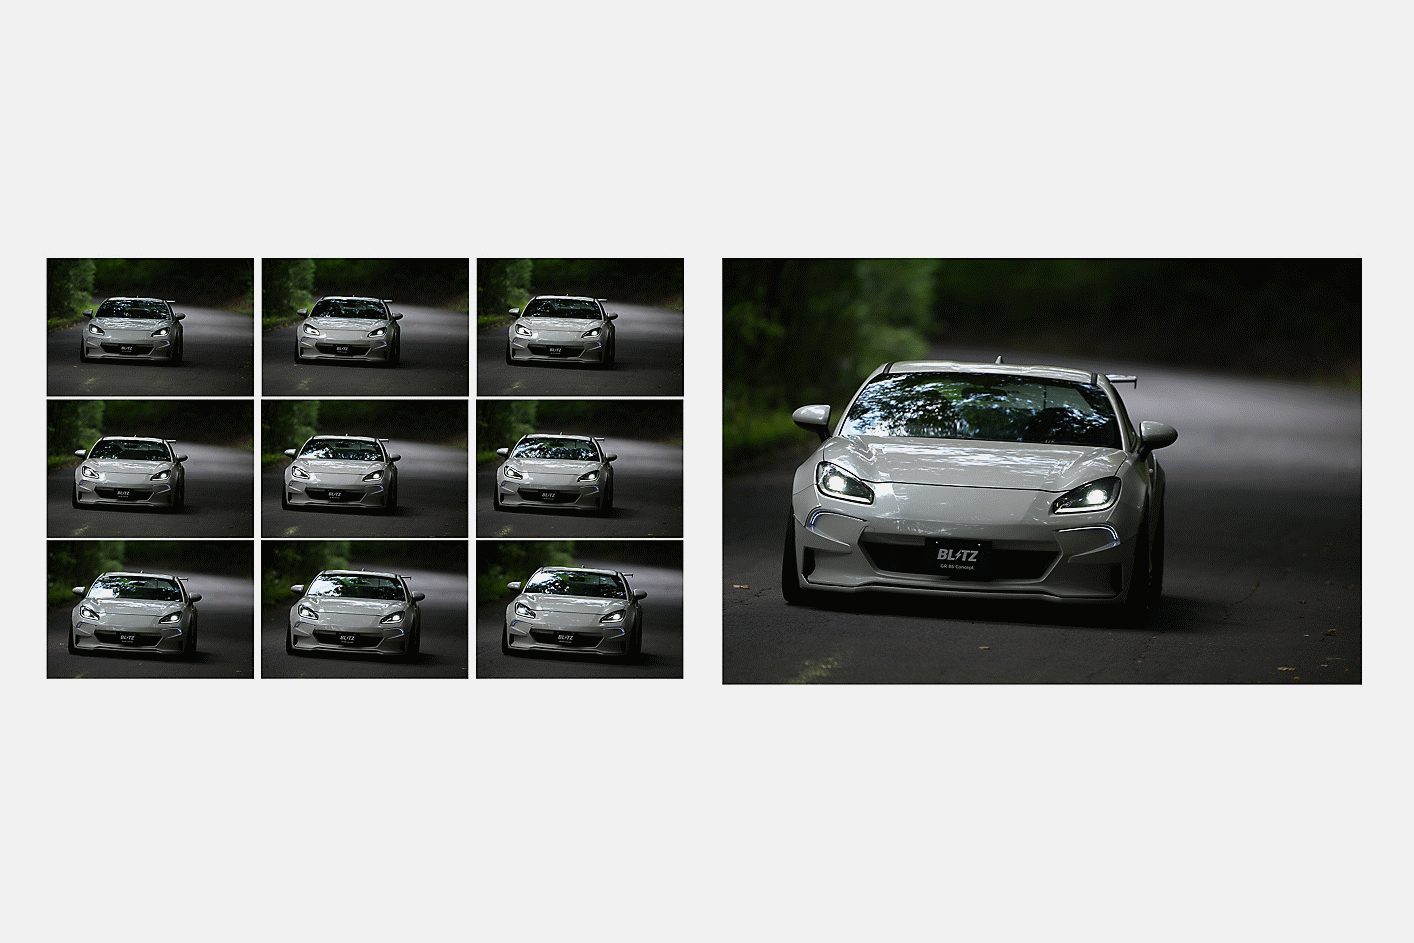 Images of a car continuously shot at 10 fps with AF/AE tracking